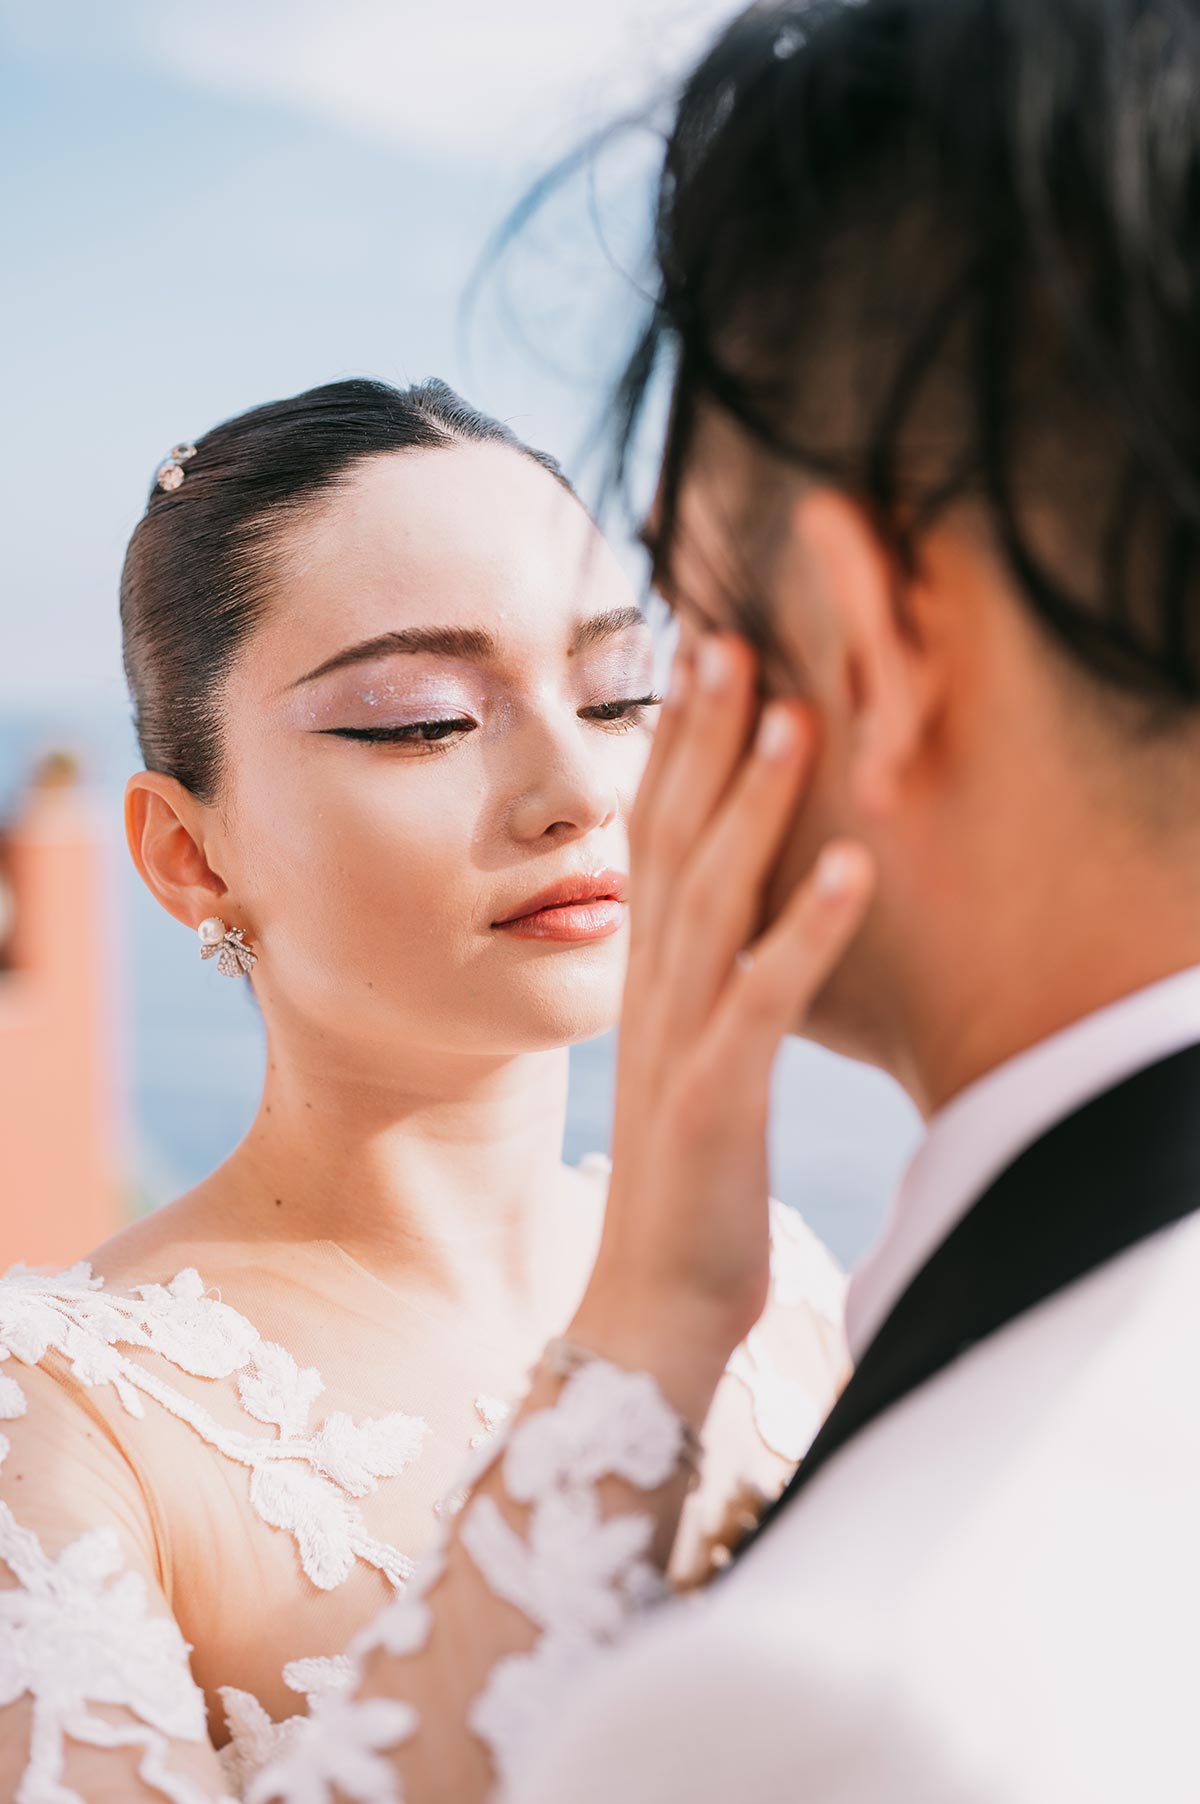 Positano Italy Weddings | Emiliano Russo | Villa dei Fisici wedding 5 3 | Positano Italy Weddings: different from each other, but all amazing and full of magic. Apart from the amazing venues, Positano itself is the best background